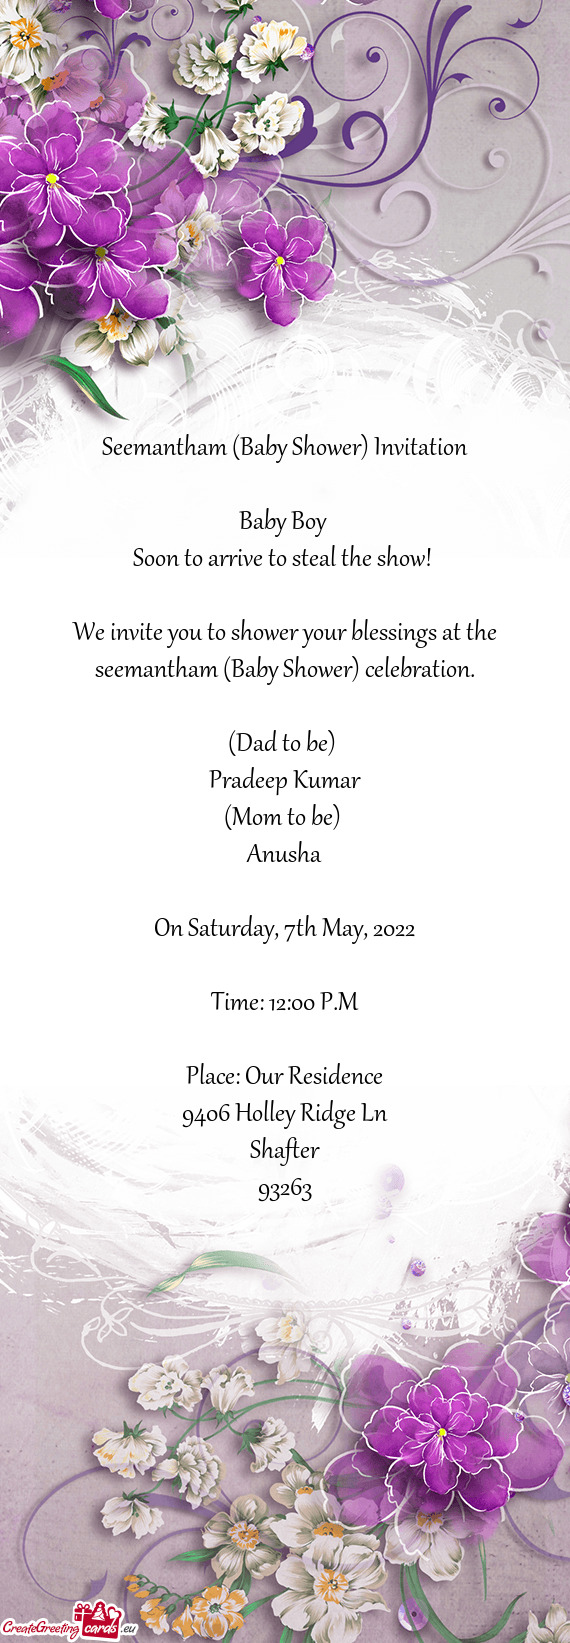 We invite you to shower your blessings at the seemantham (Baby Shower) celebration